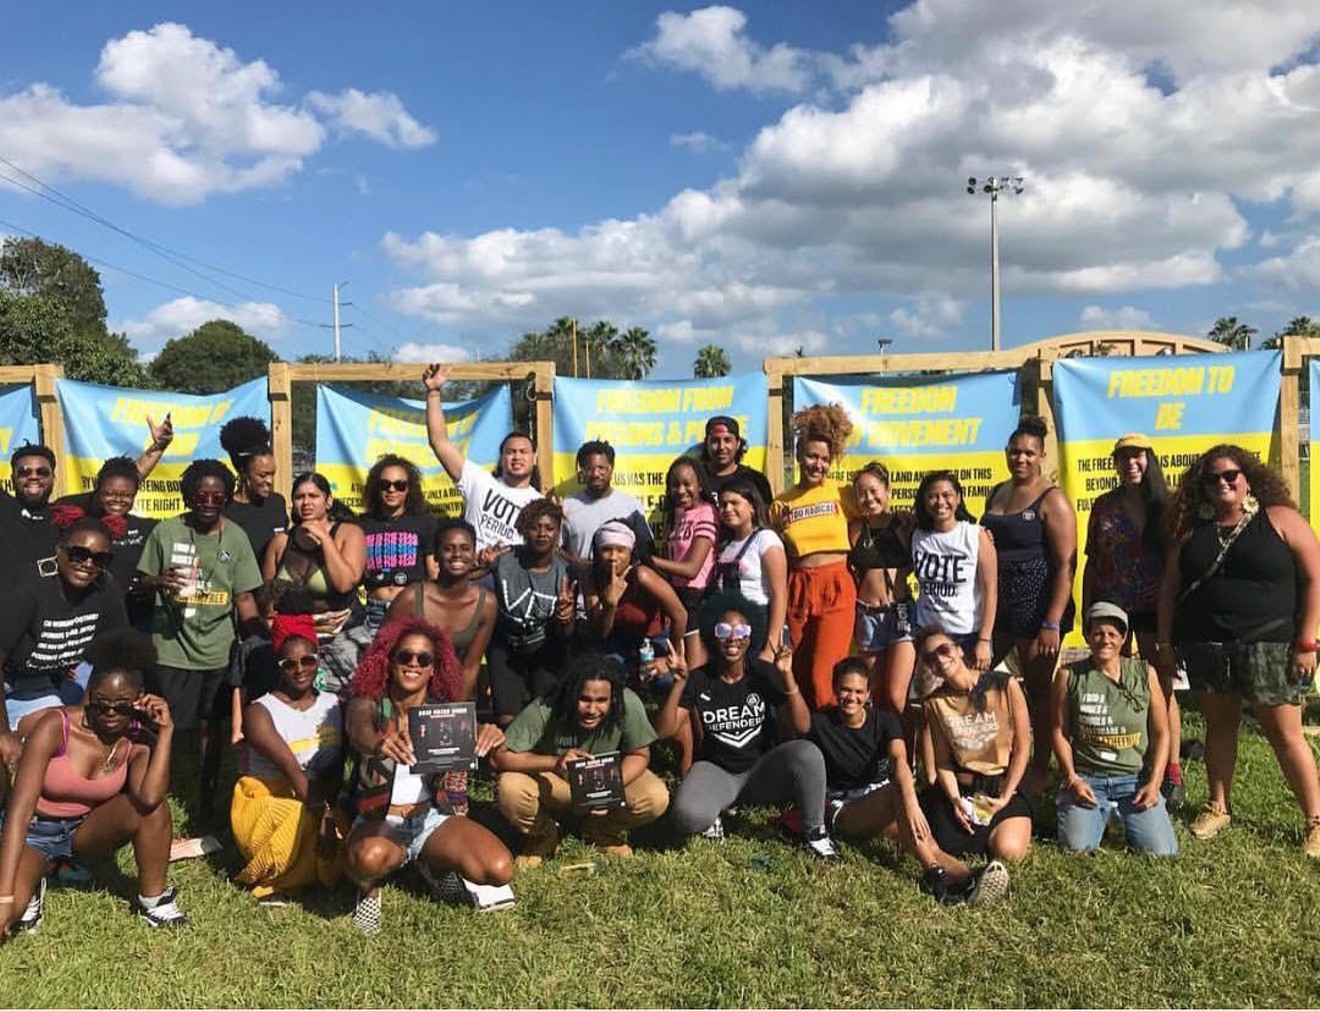 The Dream Defenders have found themselves center-stage in one of Florida's most hotly contested gubernatorial races.